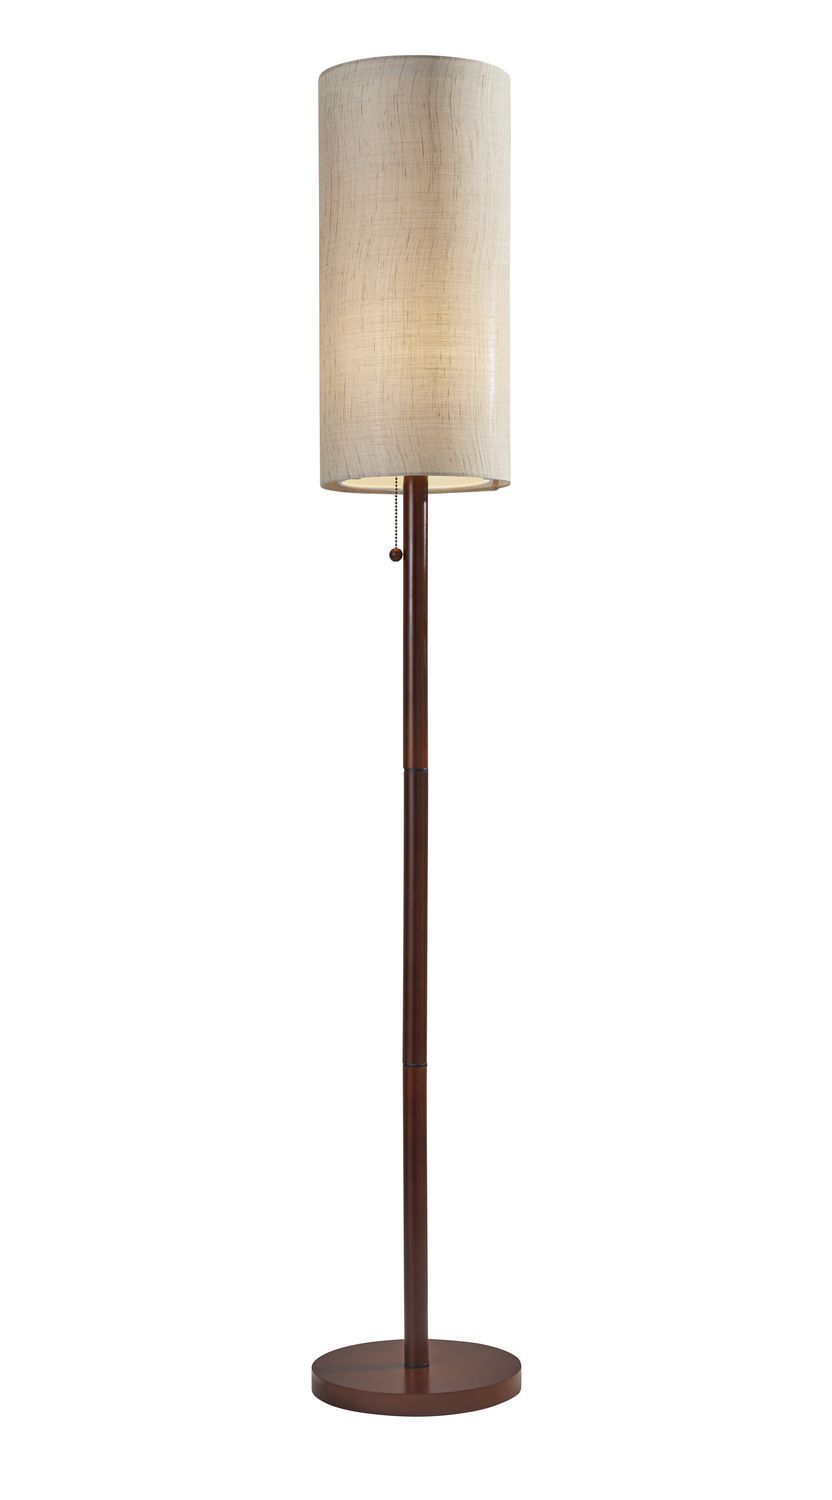 Transitional Floor Lamp In Walnut Wood From The Hamptons Collection Adesso Home 3338 15 | Narrow Floor Lamp, Floor Lamp, Wood Floor Lamp For Walnut Floor Lamps (View 11 of 15)